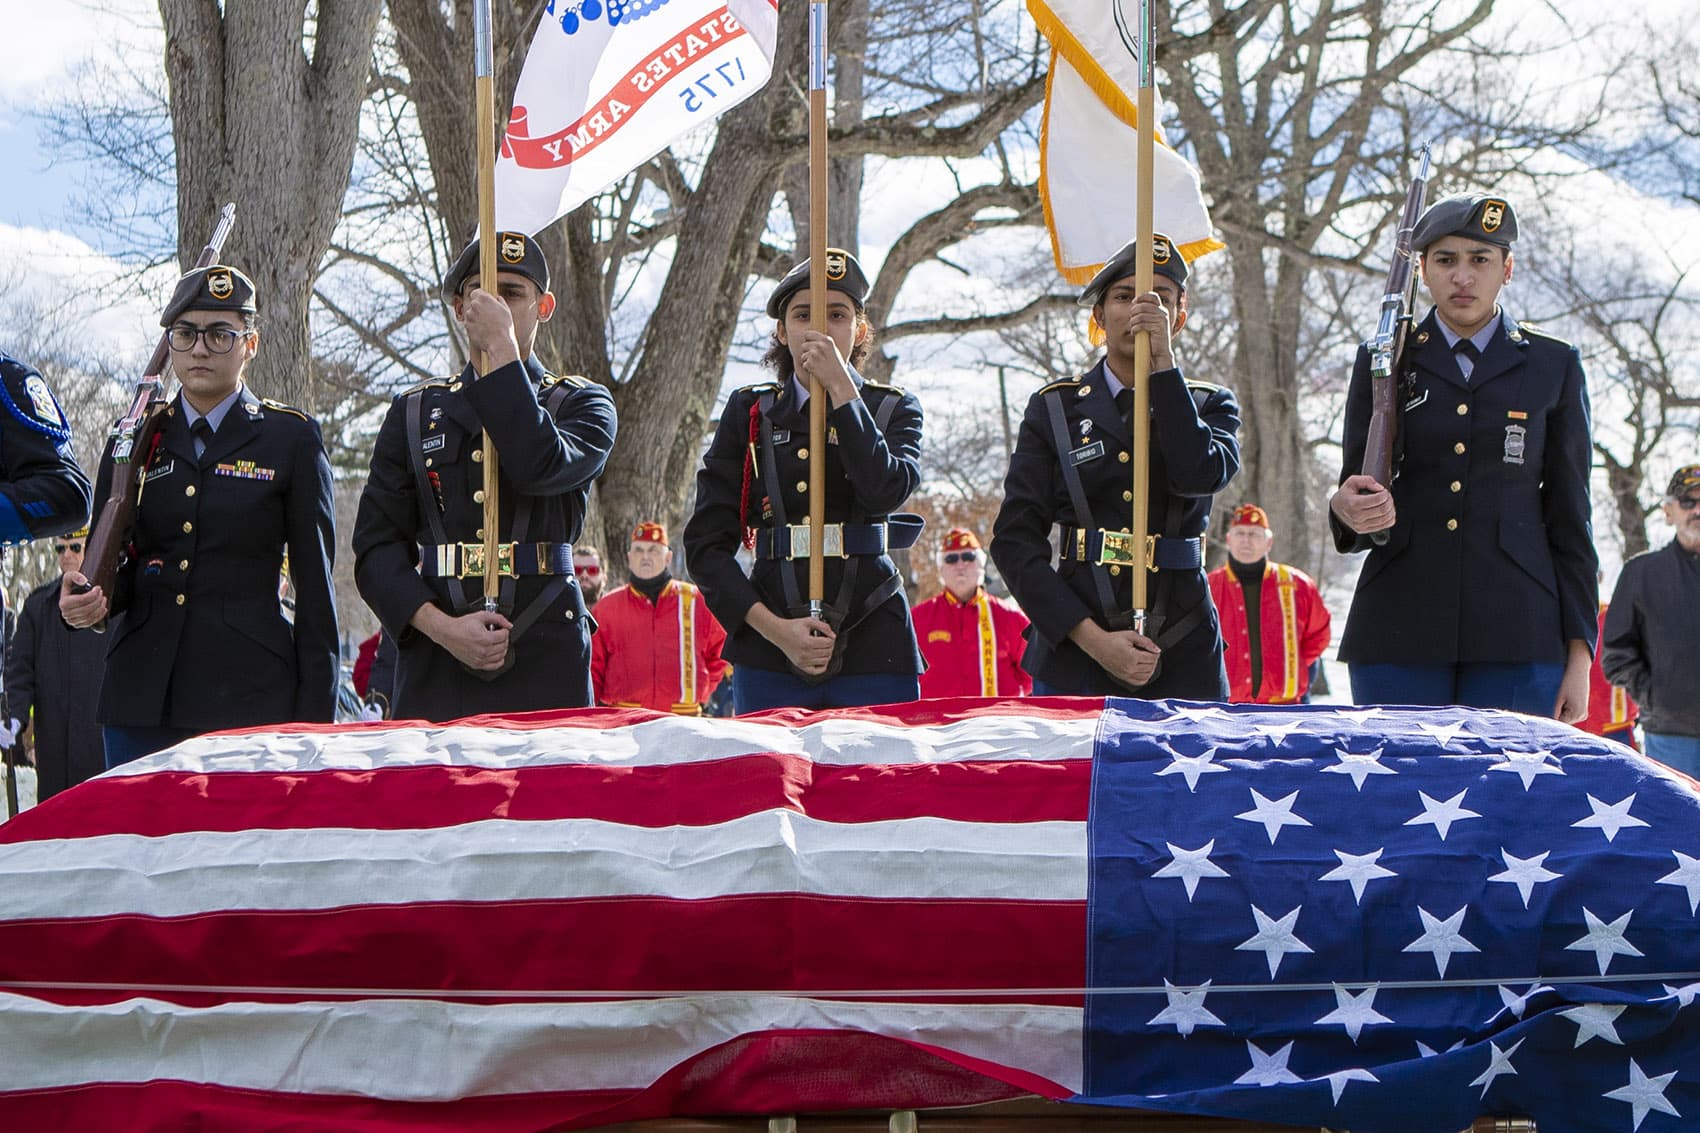 The body of veteran James McCue was buried with full military honors at Bellevue Cemetery in Lawrence. (Jesse Costa/WBUR)